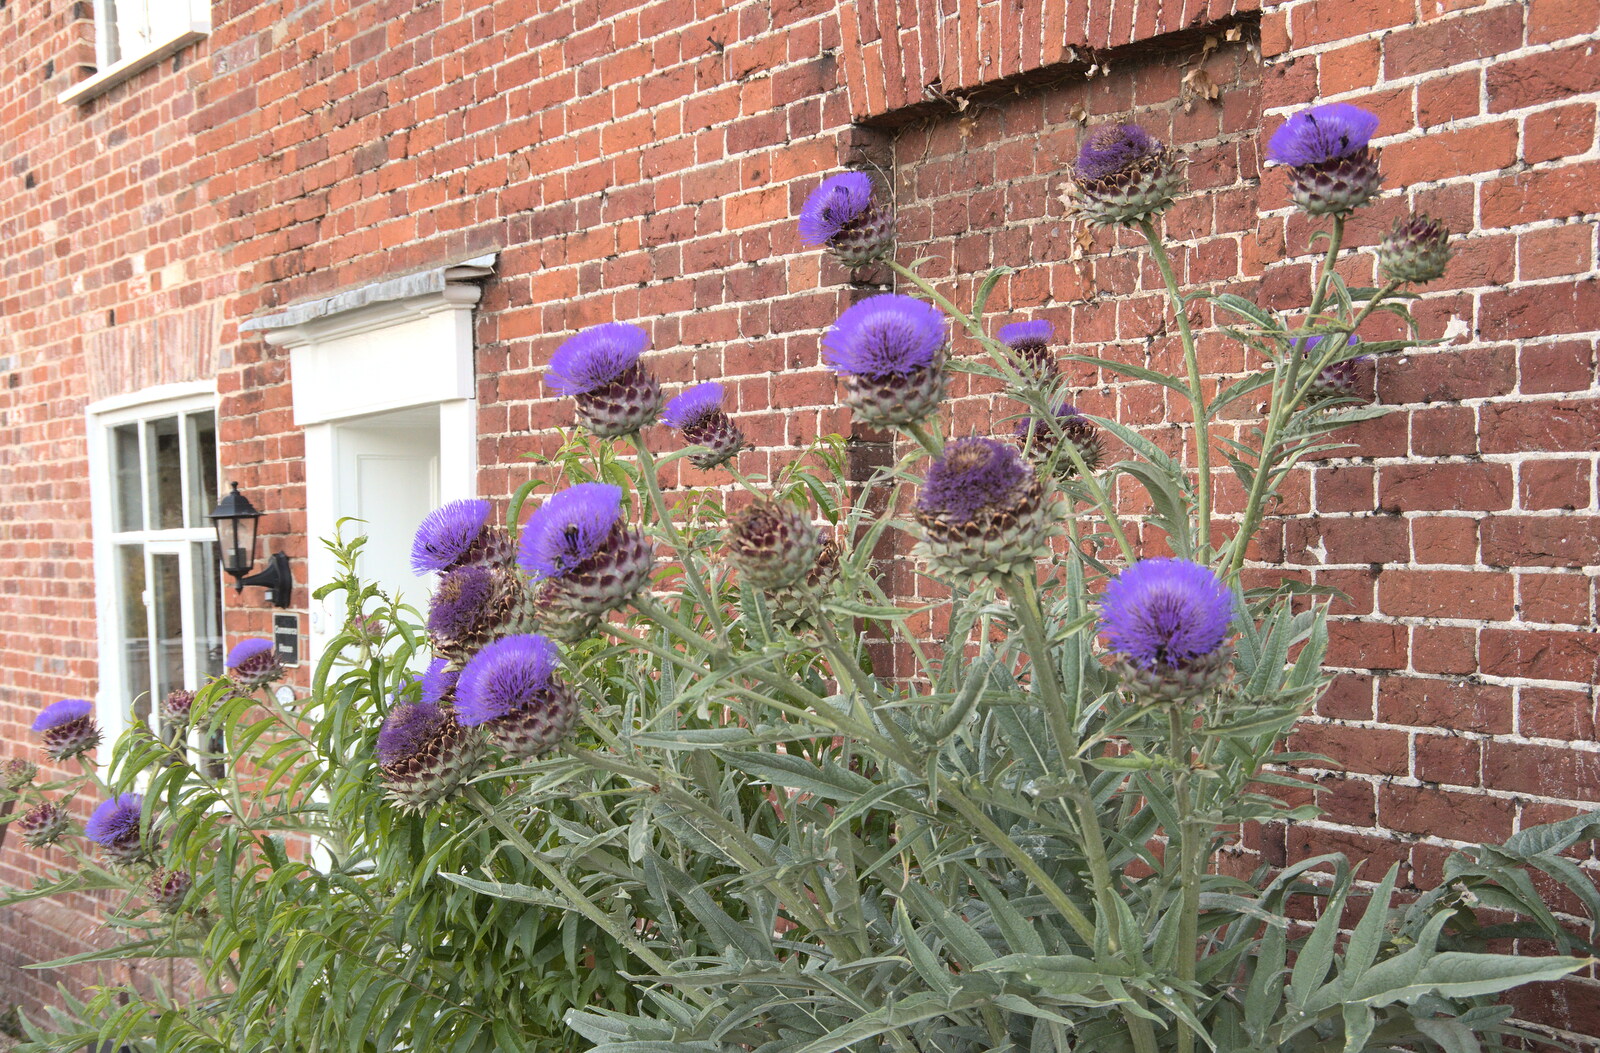 The Denton Beer Festival and a Party, Brockdish, Norfolk - 16th July 2022: Suey spots an amazing thistle in Brockdish